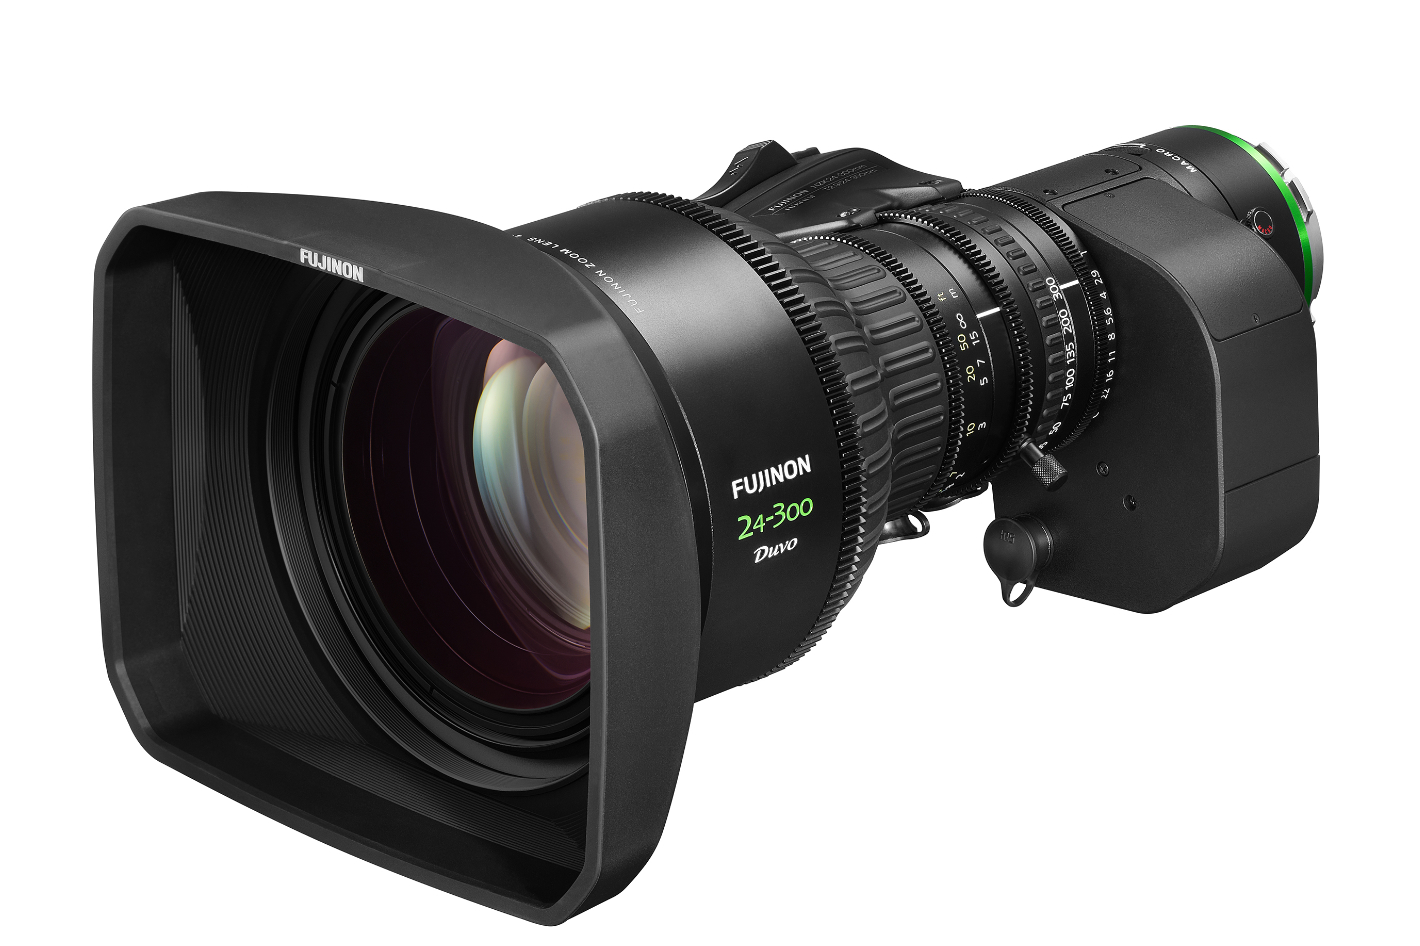 FUJINON Duvo HZK24-300mm PL Mount Zoom Lens now available 3